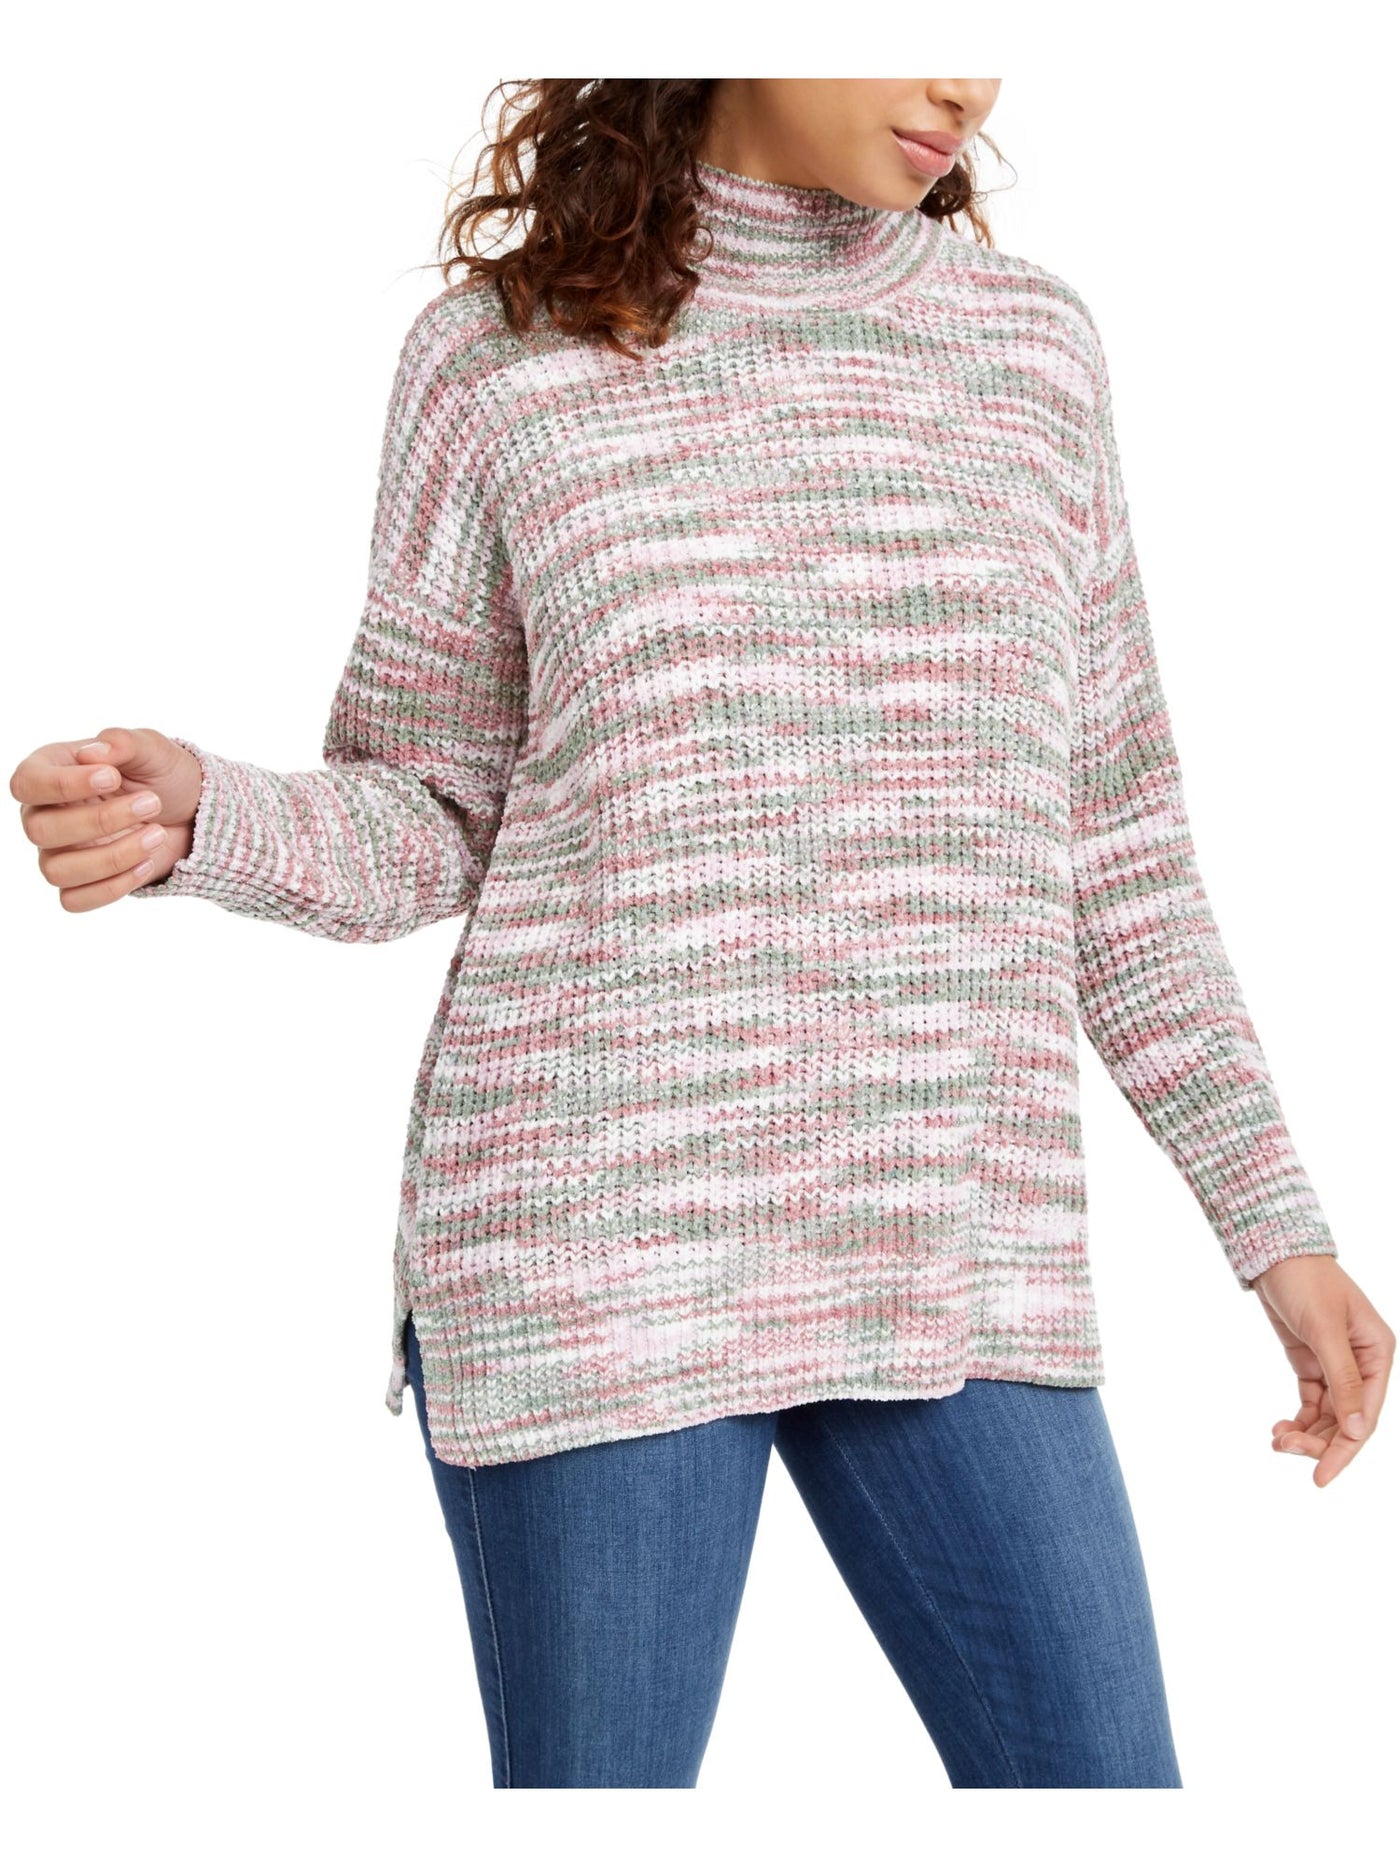 HIPPIE ROSE Womens Pink Printed Long Sleeve Turtle Neck Blouse Juniors S